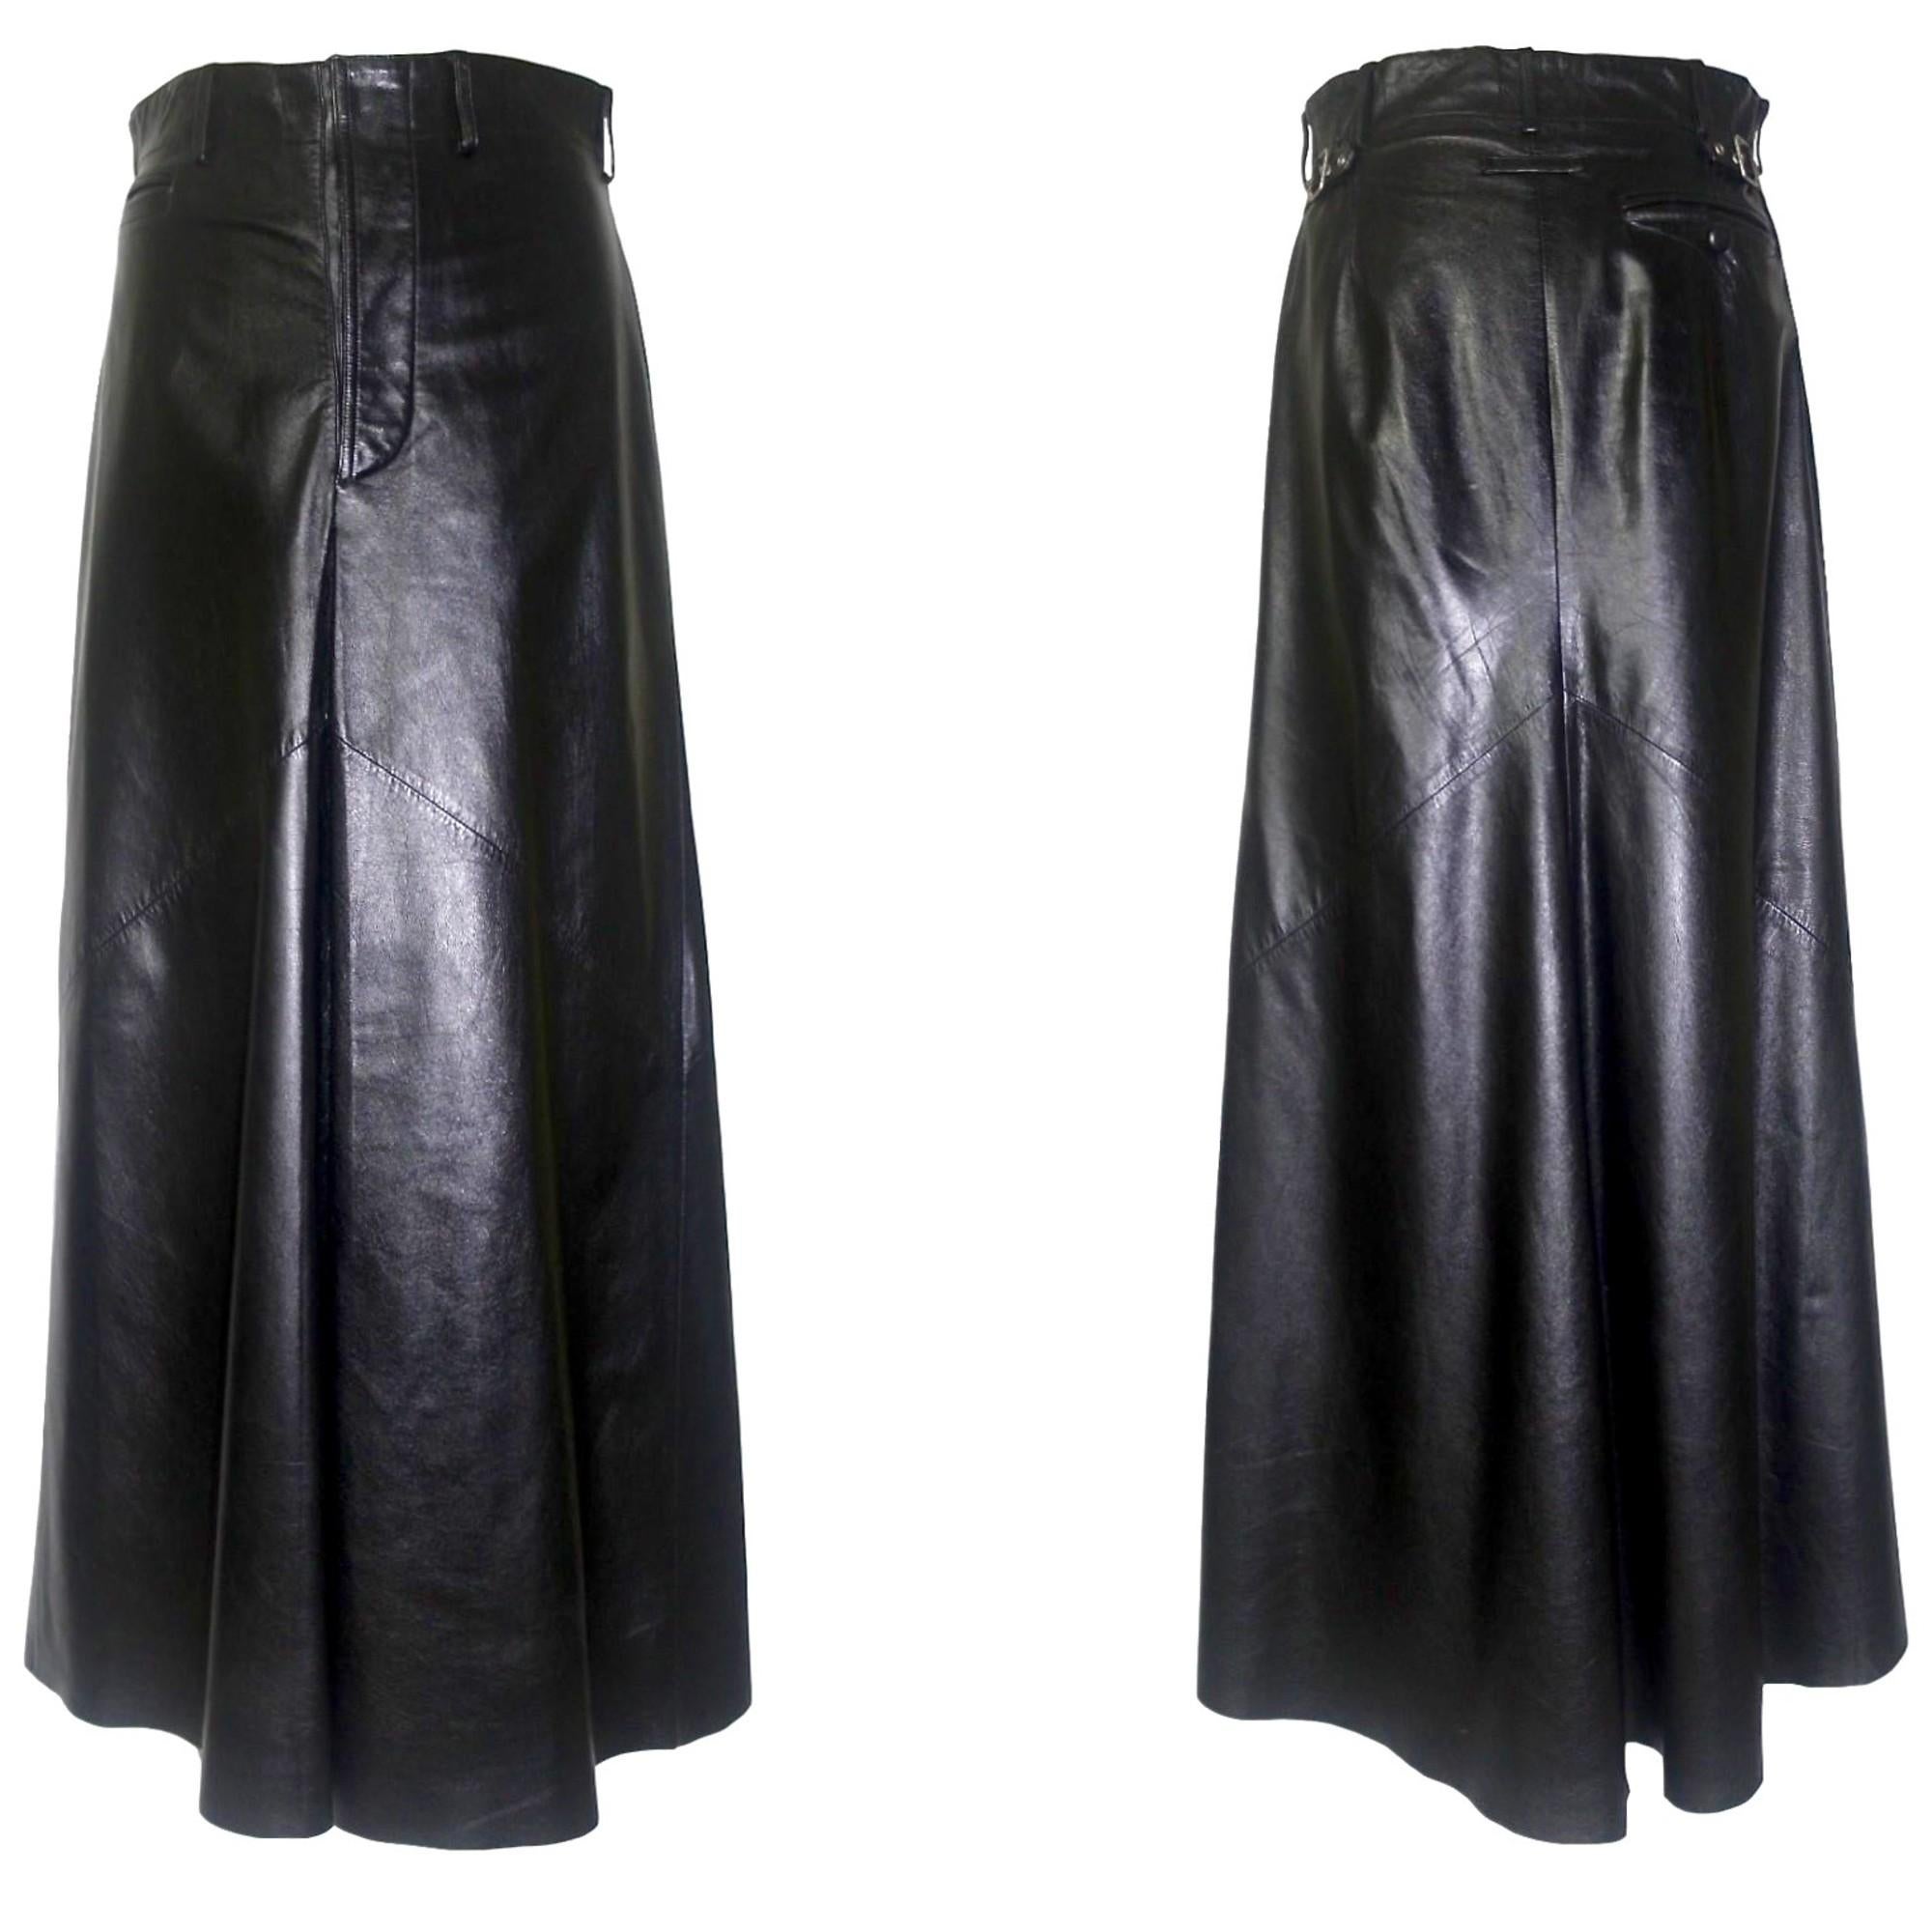 Jean Paul Gaultier
1990s Homme Leather Skirt
Fully Lined
Leather is very Soft and Subtle
No Marks or Scratches to the Leather
30 inch Waist
40 inch Length
